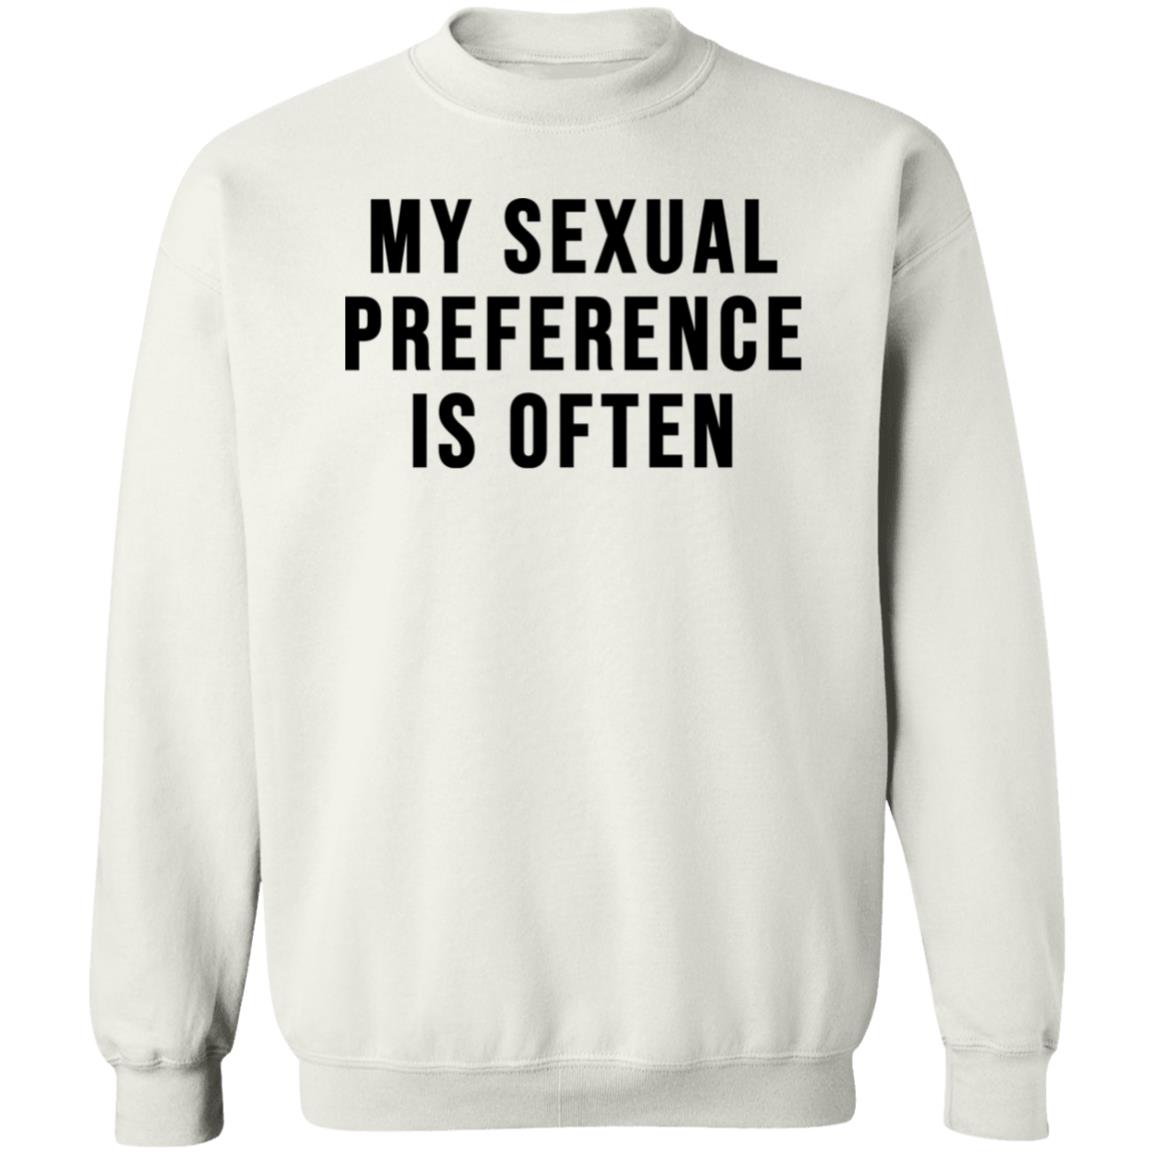 My Sexual Preference Is Often Shirt 2